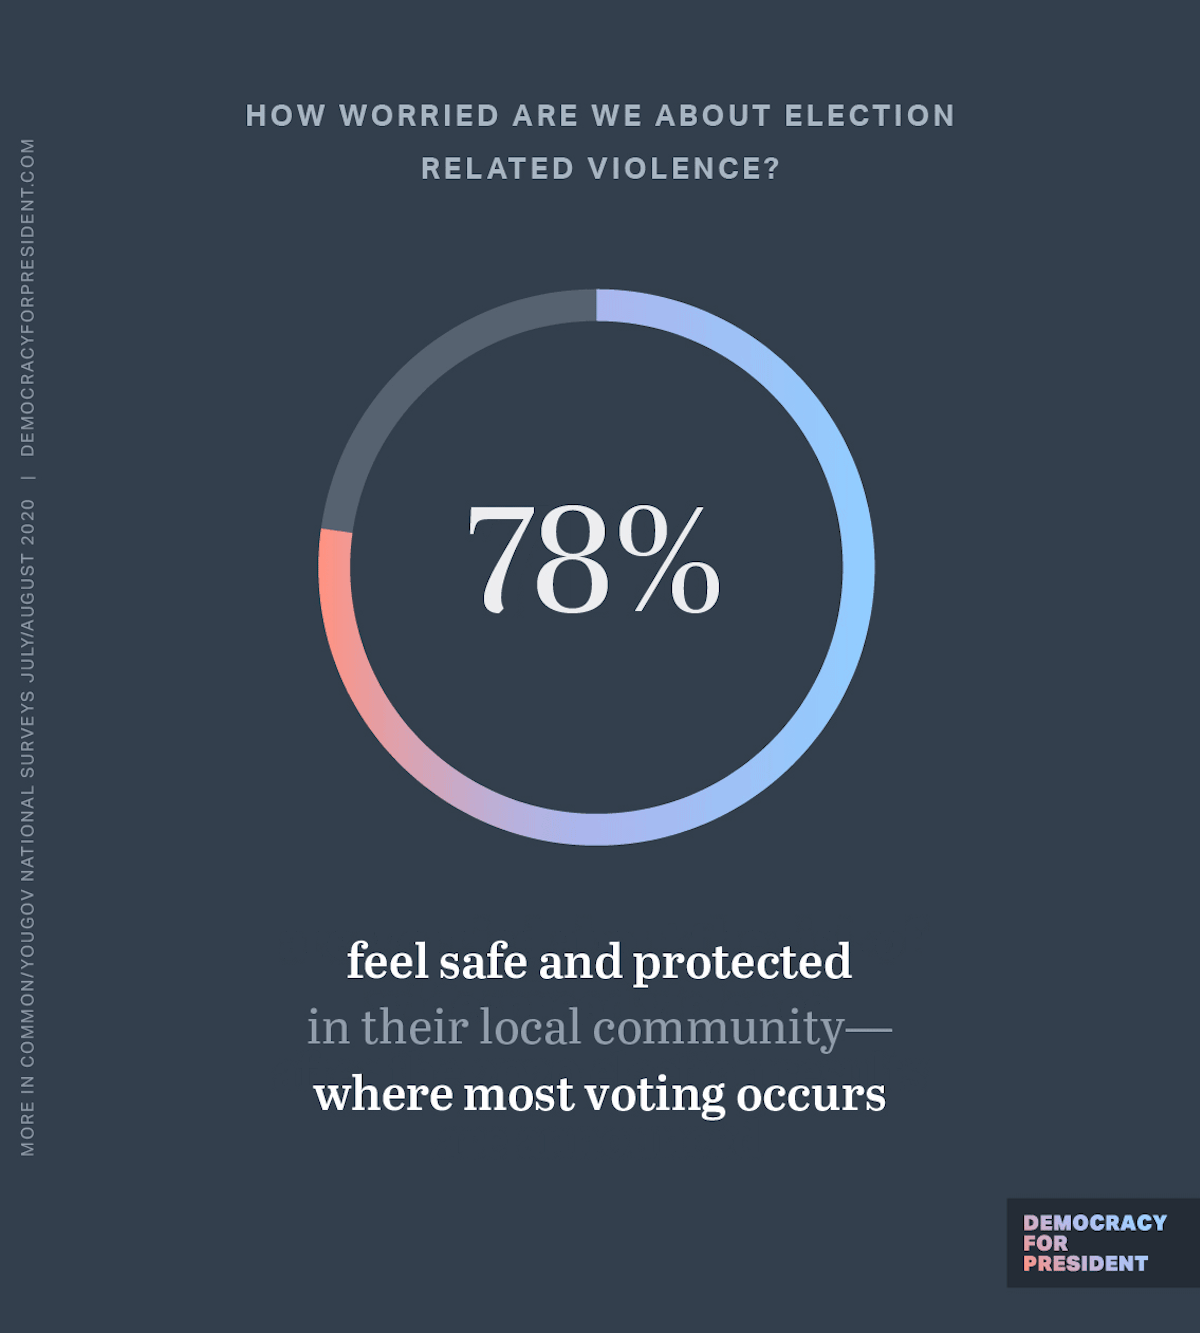 How worried are we about election-related violence? 78% feel safe and protected in their local community - where most voting occurs. 71% are worried about the risk of widespread violence after the 2020 election results are announced.